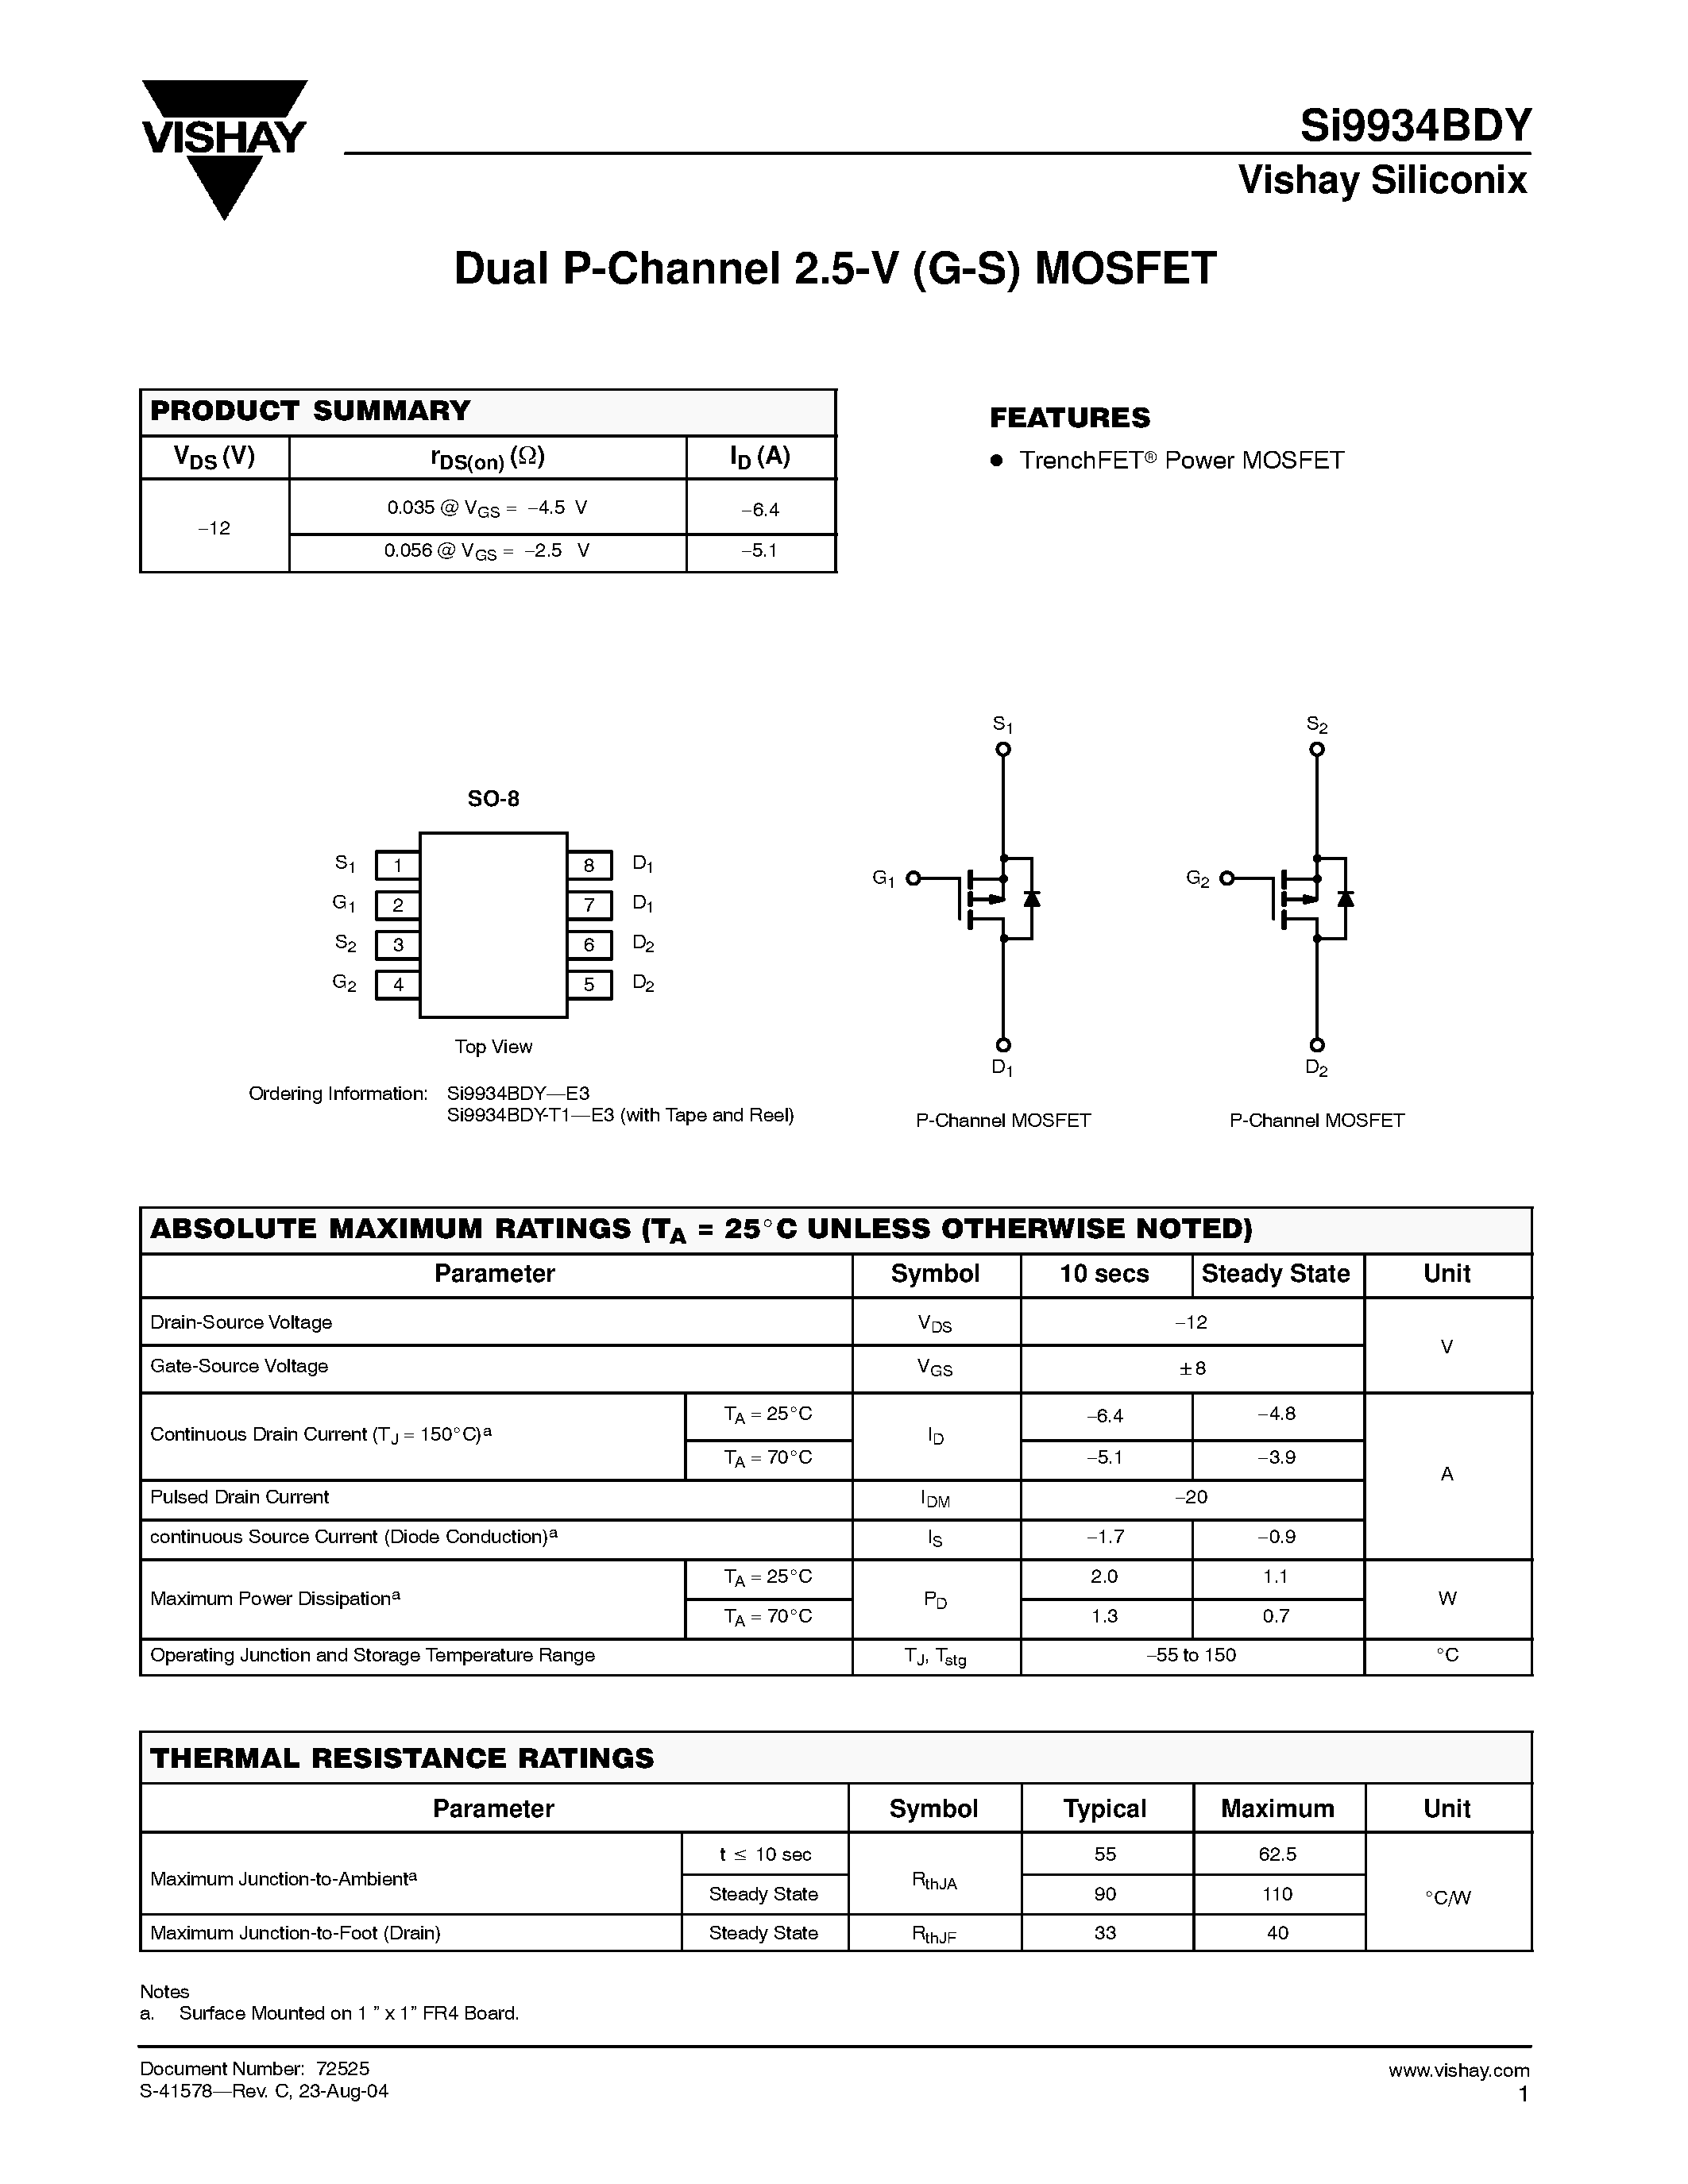 Datasheet SI9934BDY-E3 - Dual P-Channel 2.5-V (G-S) MOSFET page 1